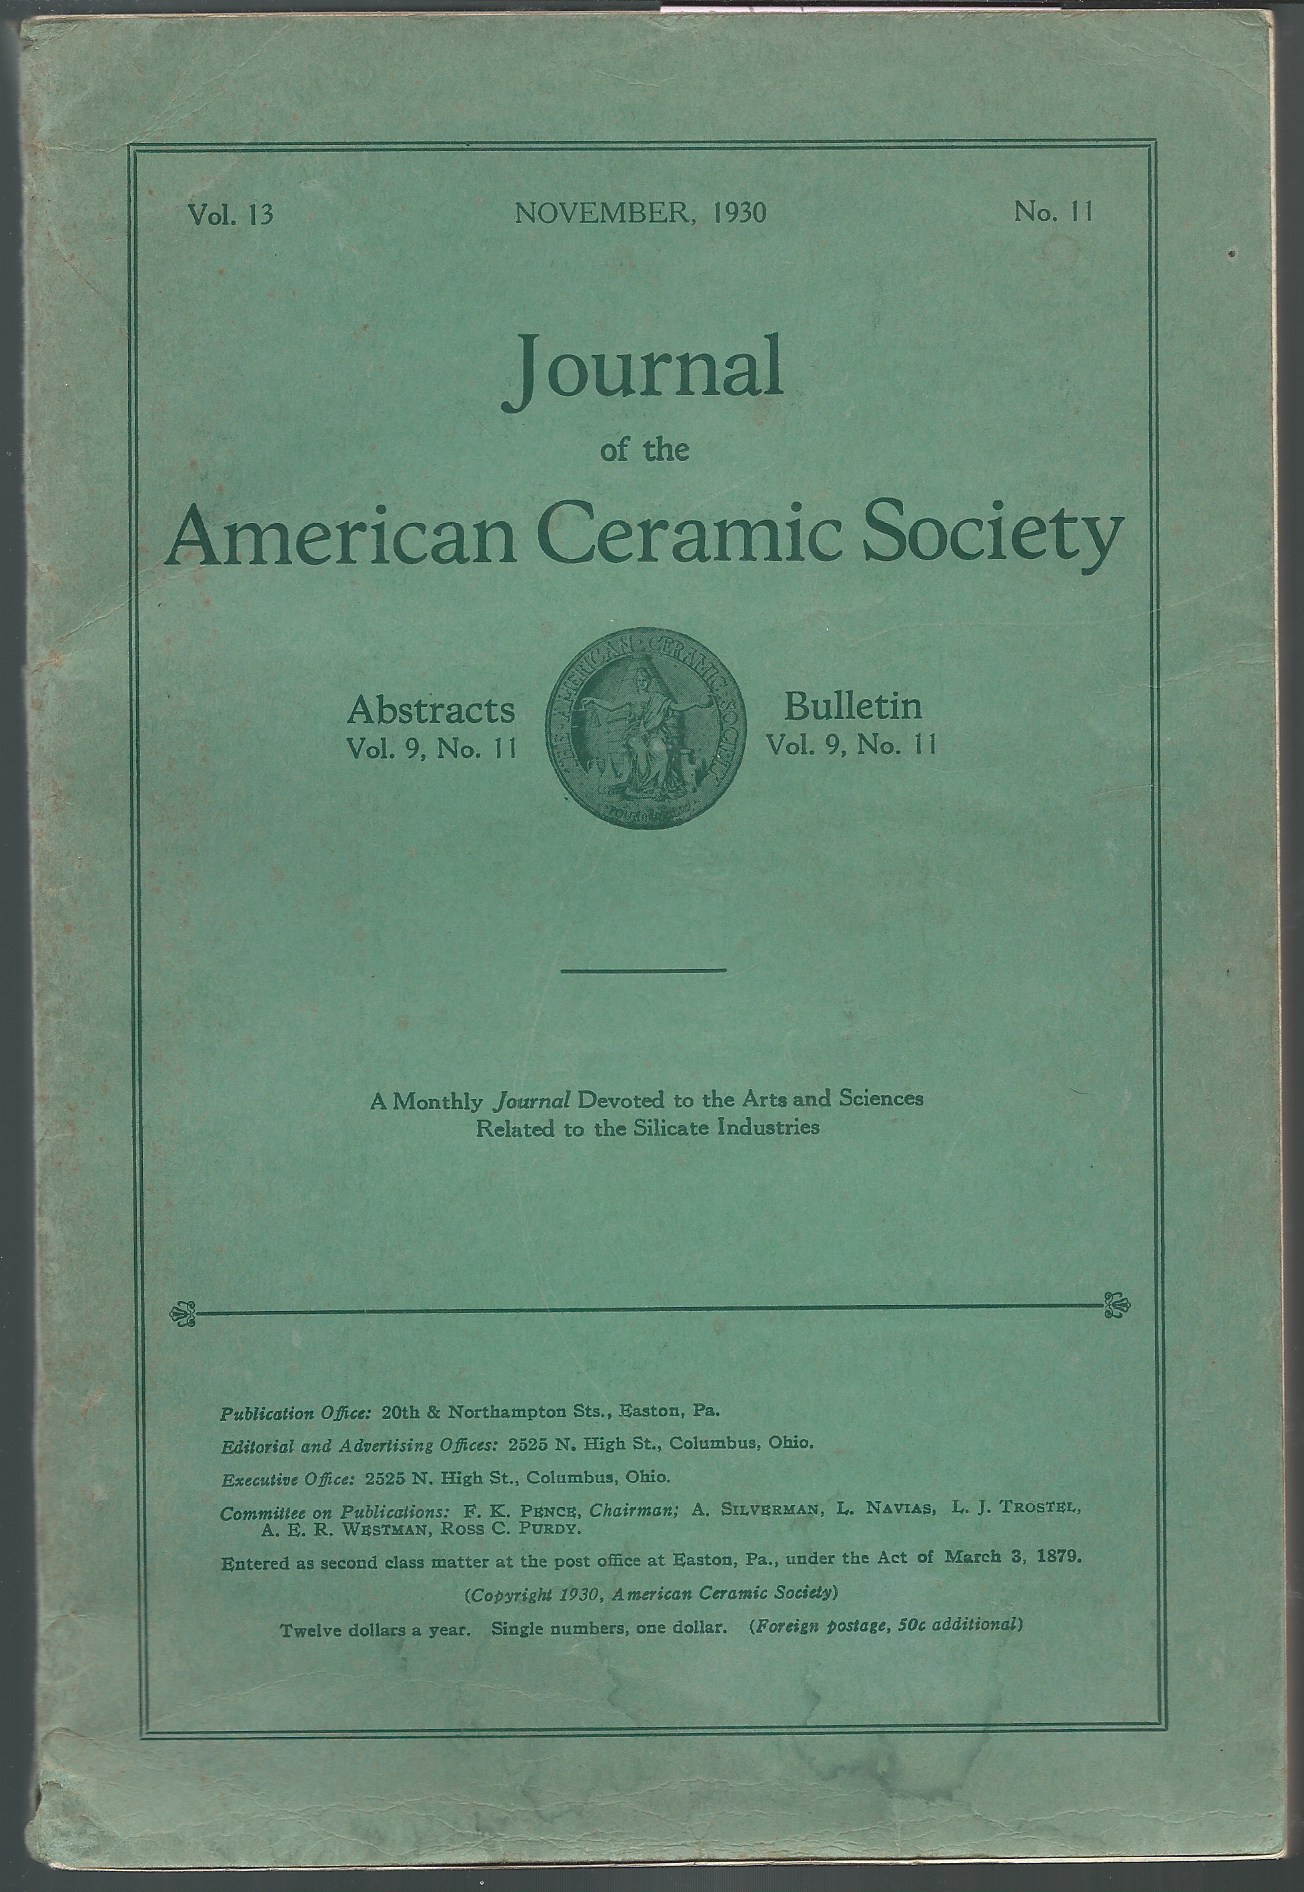 Image for Ceramic Abstracts and the Bulletin; JOURNAL OF THE AMERICAN CERAMIC SOCIETY: